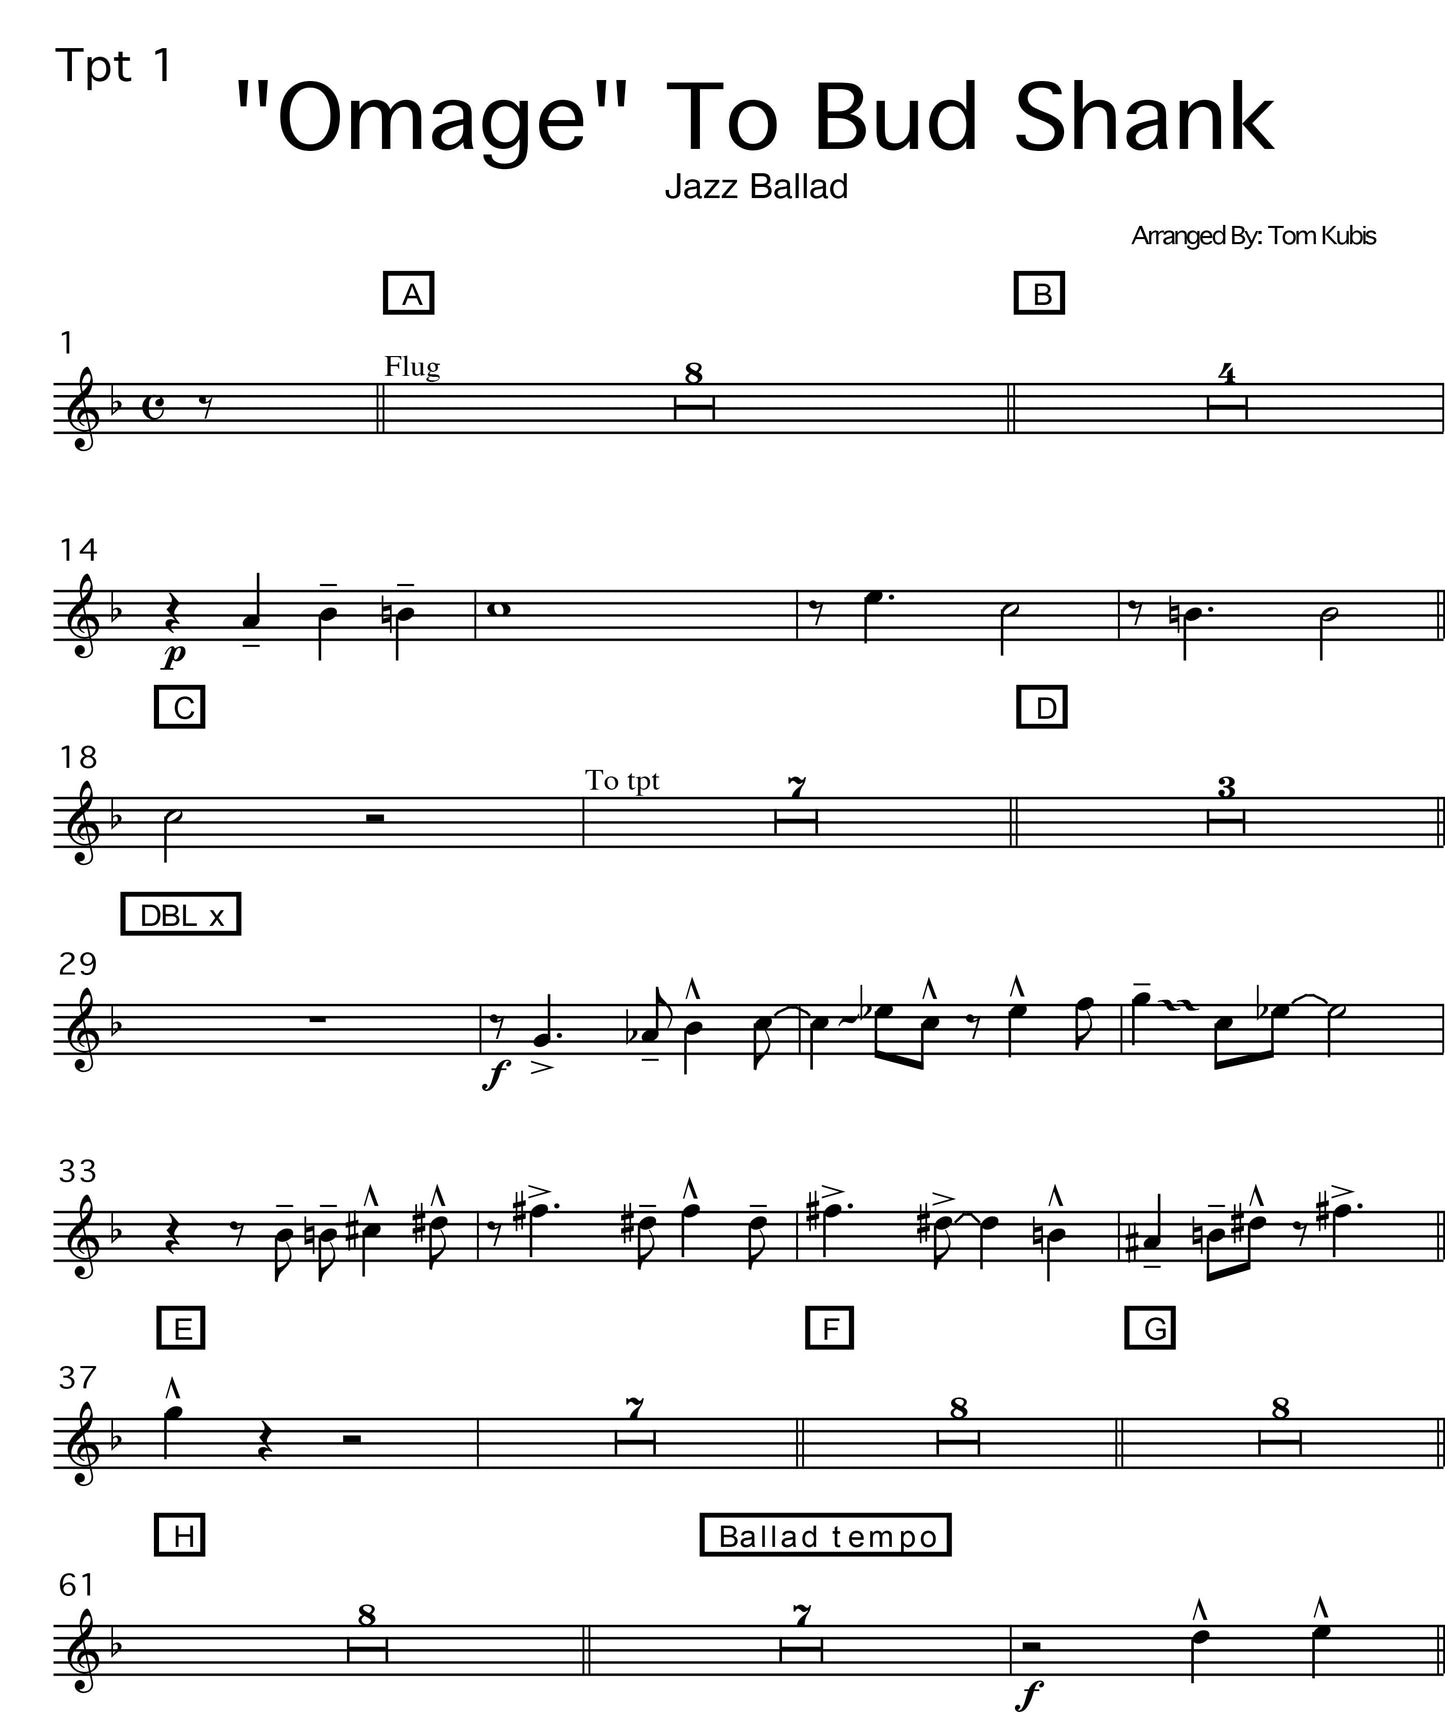 Omage To Bud Shank